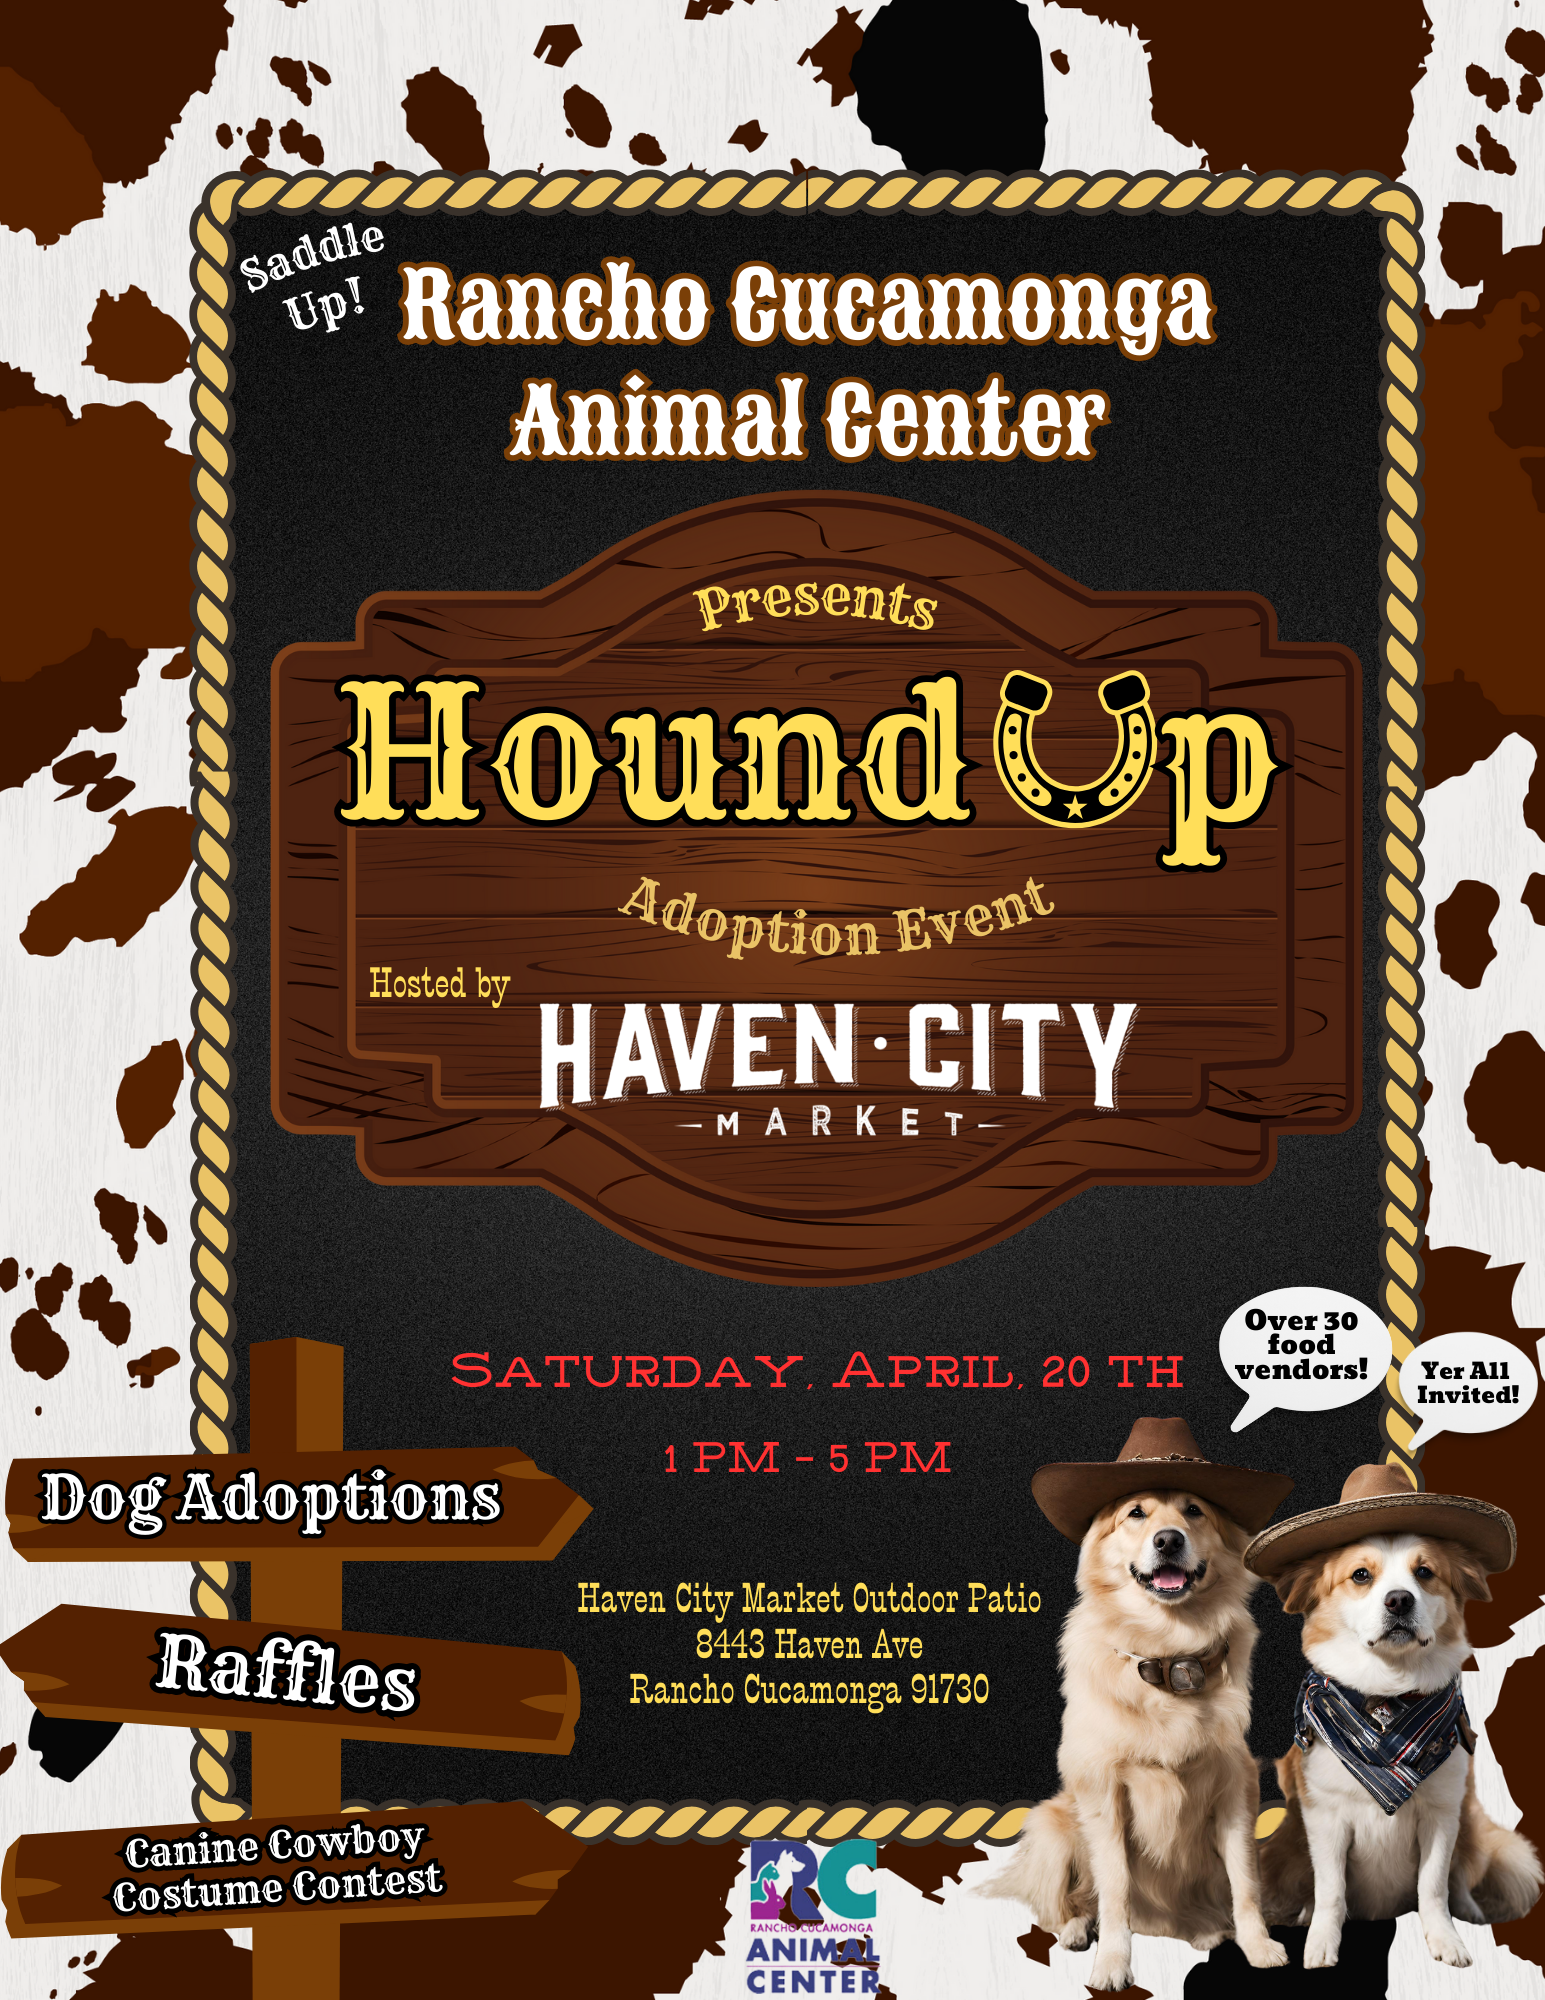 RC Animal Center Presents Hound Up Adoption Event at Haven City Market, Saturday April 20th, 1-5pm